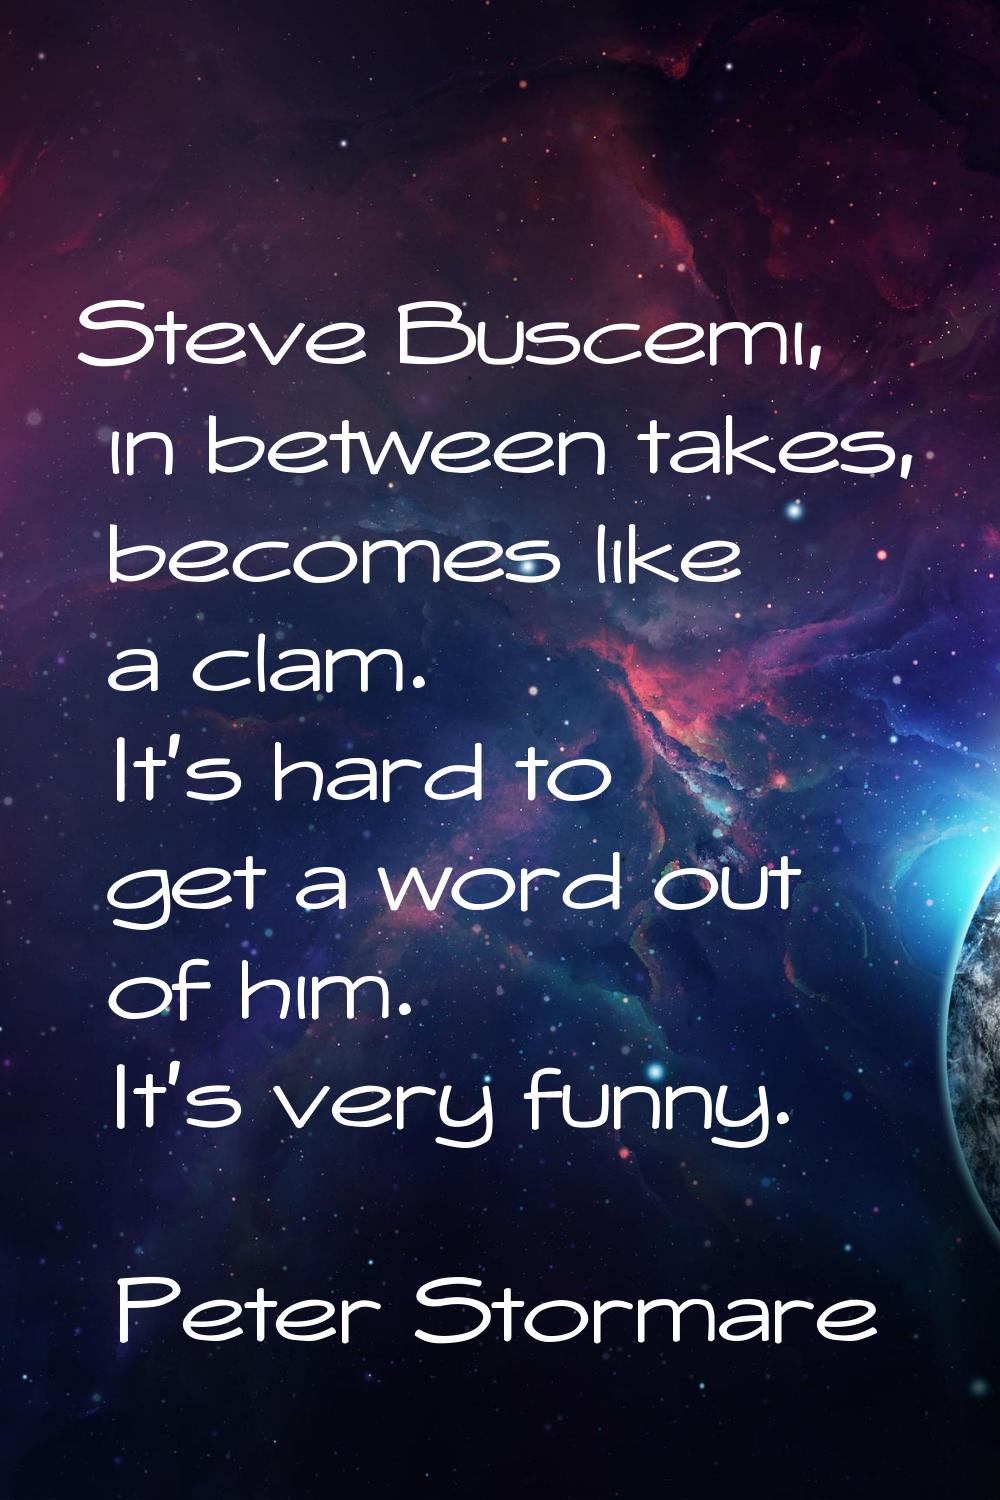 Steve Buscemi, in between takes, becomes like a clam. It's hard to get a word out of him. It's very